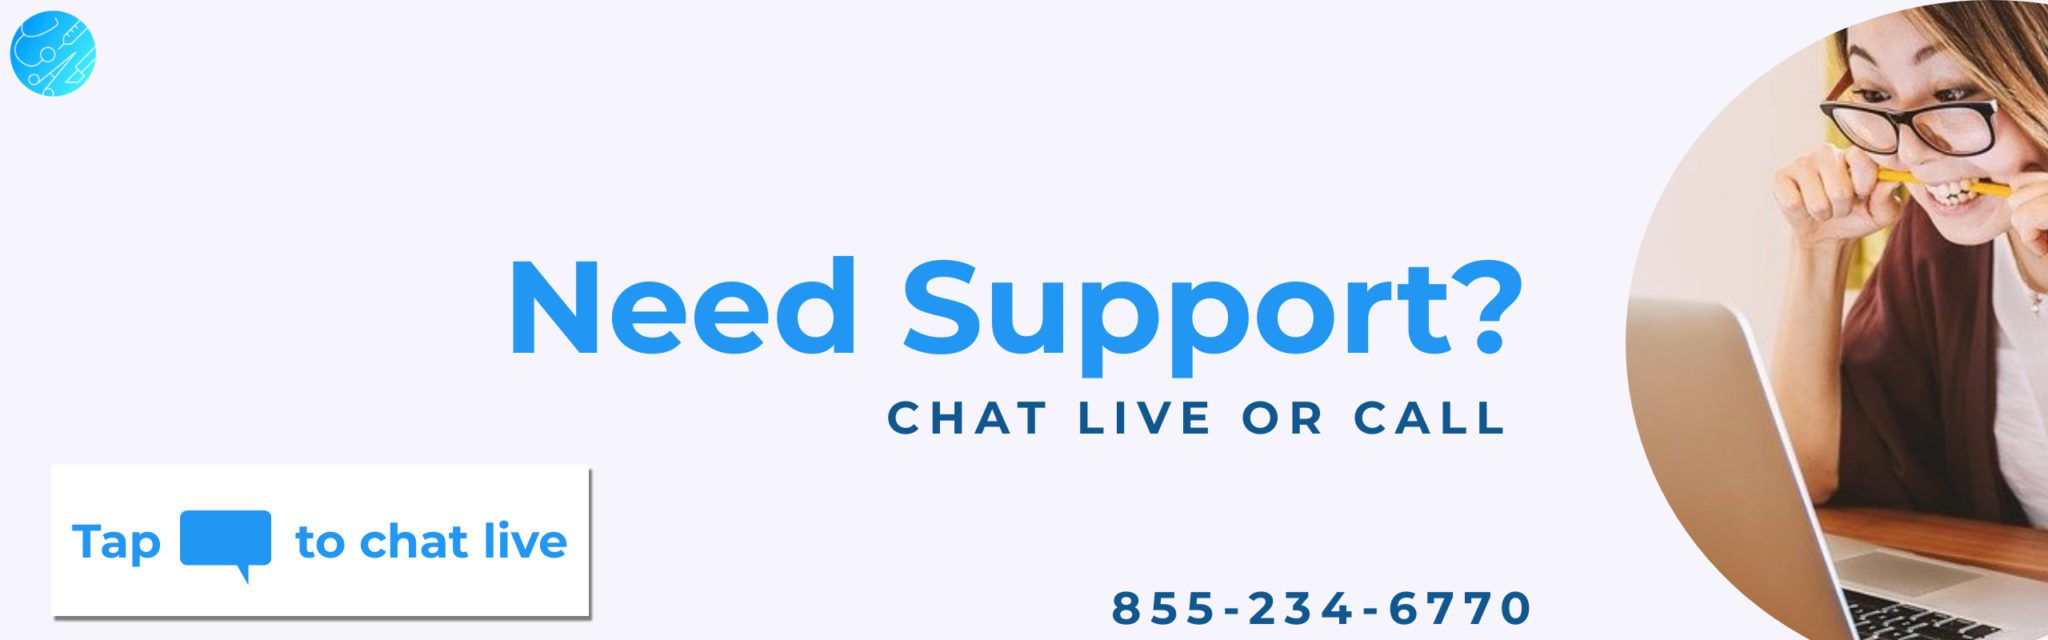 Live chat banner